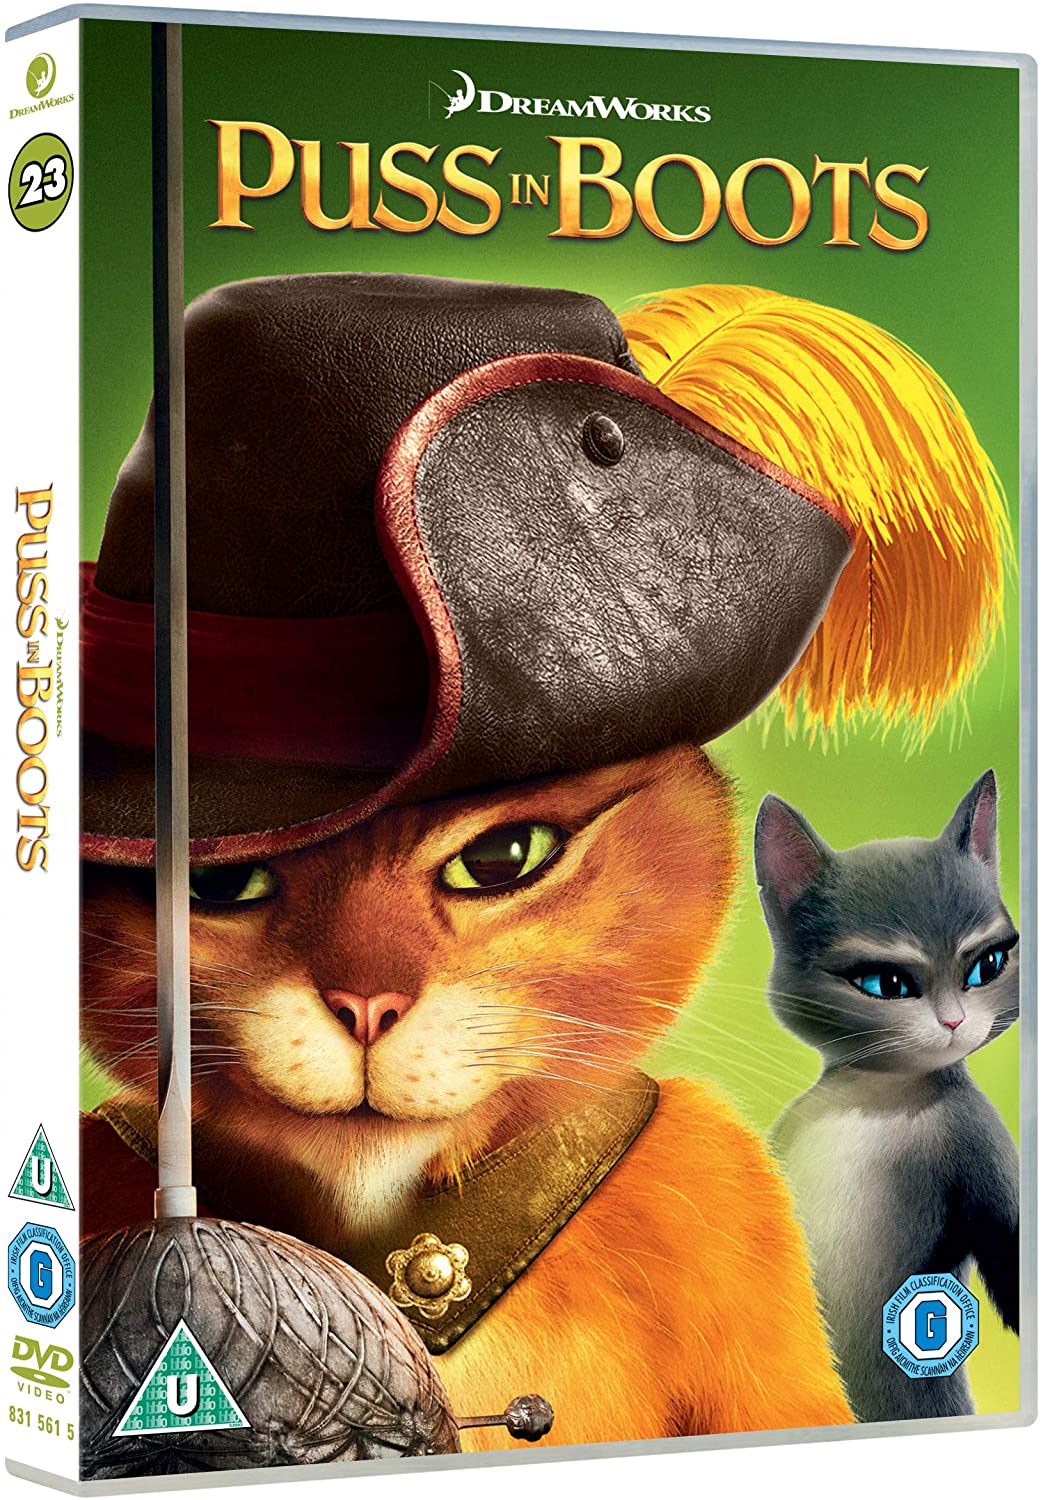 Puss in Boots [2011] (Dreamworks) (DVD)